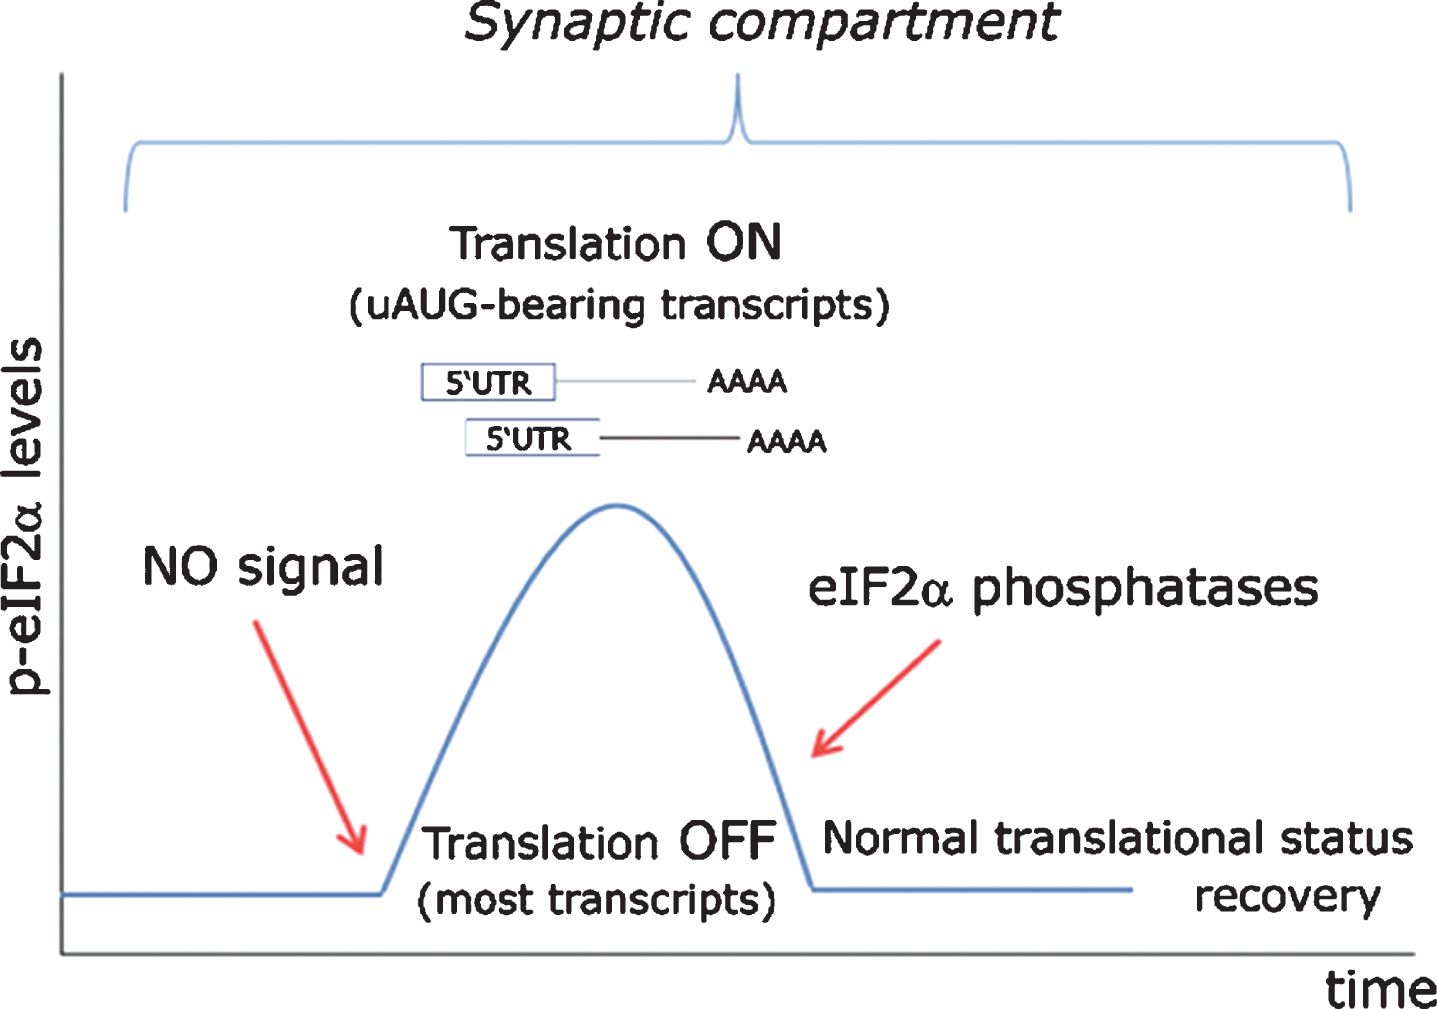 Proposed model for eIF2α-mediated translational control at the synapse. In a resting state exempt of cellular stress, nitric oxide (NO)-HRI signaling induces a peak in eIF2α phosphorylation levels, which are rapidly turned back to their basal state through the action of eIF2α-phosphatases. Such transient rise in eIF2α levels triggers the timely translation of synaptically polarized uAUG-bearing mRNAs, while temporarily arresting general protein translation. Importantly, such signaling model can only be effective when cellular stress does not interfere with eIF2α phosphorylation through the action of other eIF2-kinases (PERK, PKR, GCN2) or even an eventually stress-activated HRI.